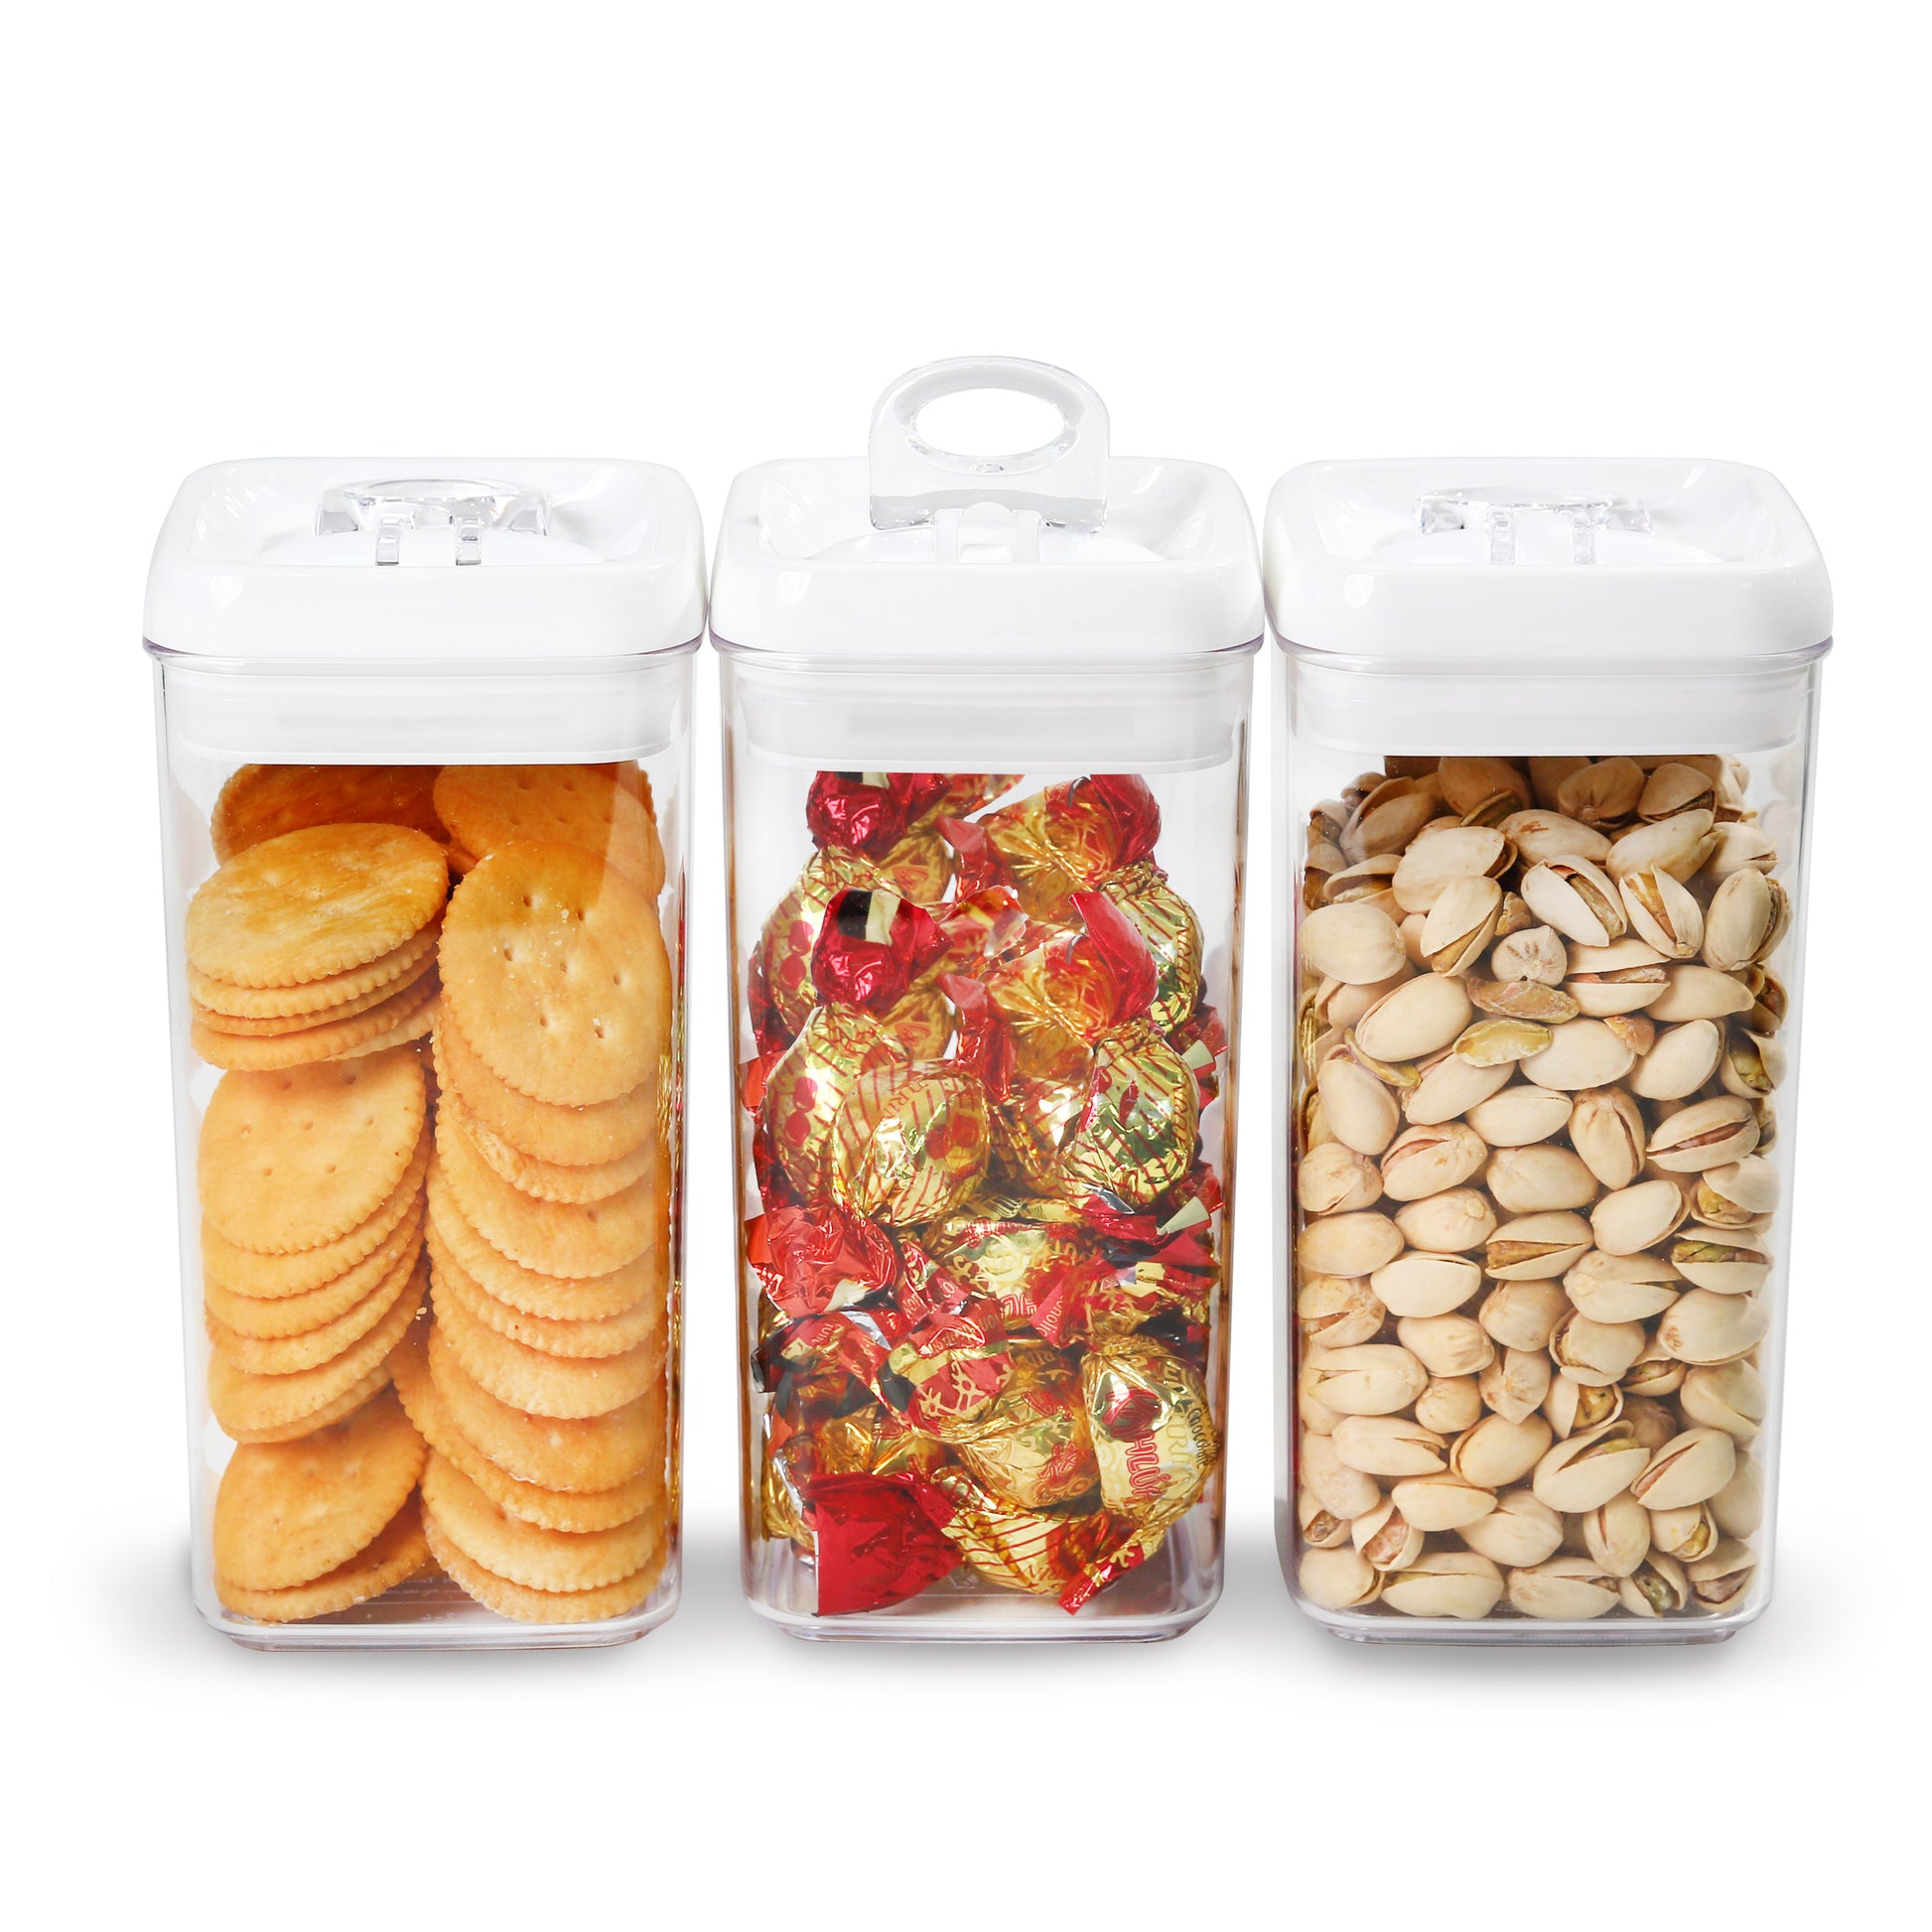 3pc Kitchen Pantry Airtight Food Storage Container 0.9L Clear Box Set with  Lids